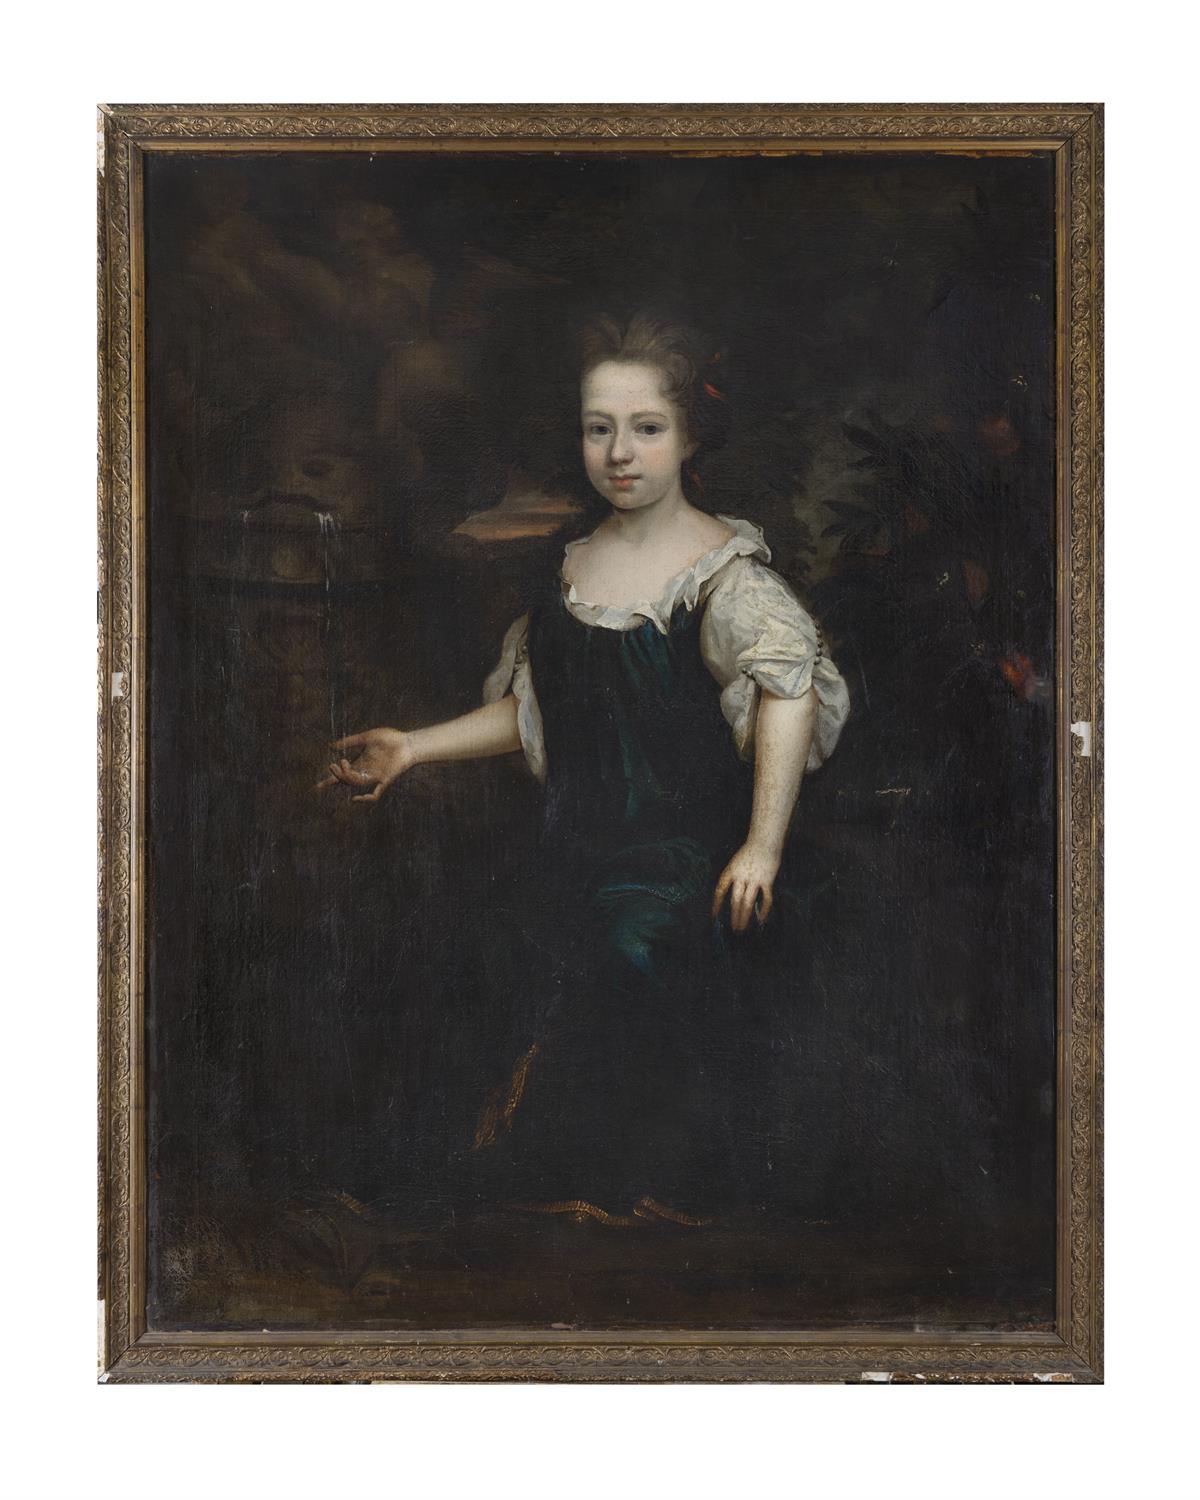 ATTRIBUTED TO THOMAS POOLEY (1646-1720) Portrait of a young girl seated on a rustic bench,